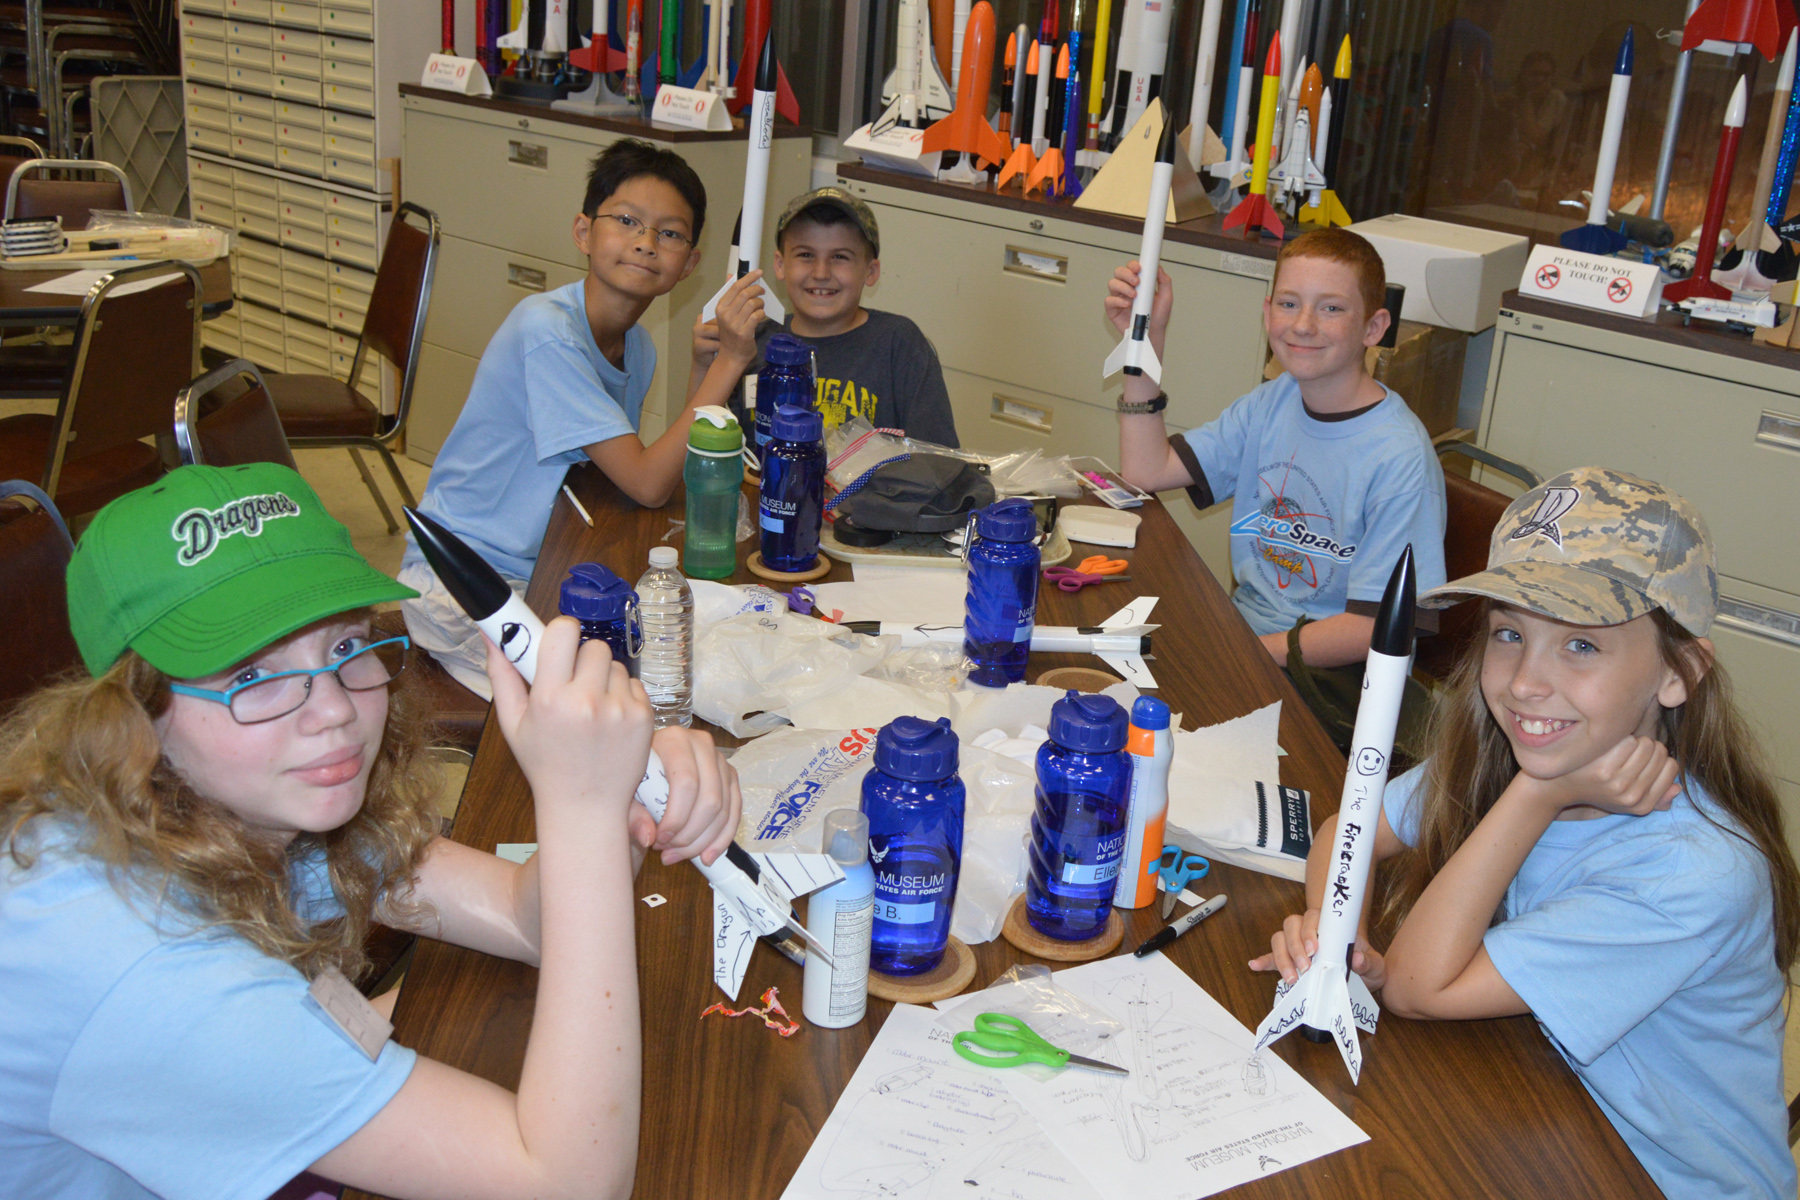 Students in the Summer Rocketry Camp display their model rockets